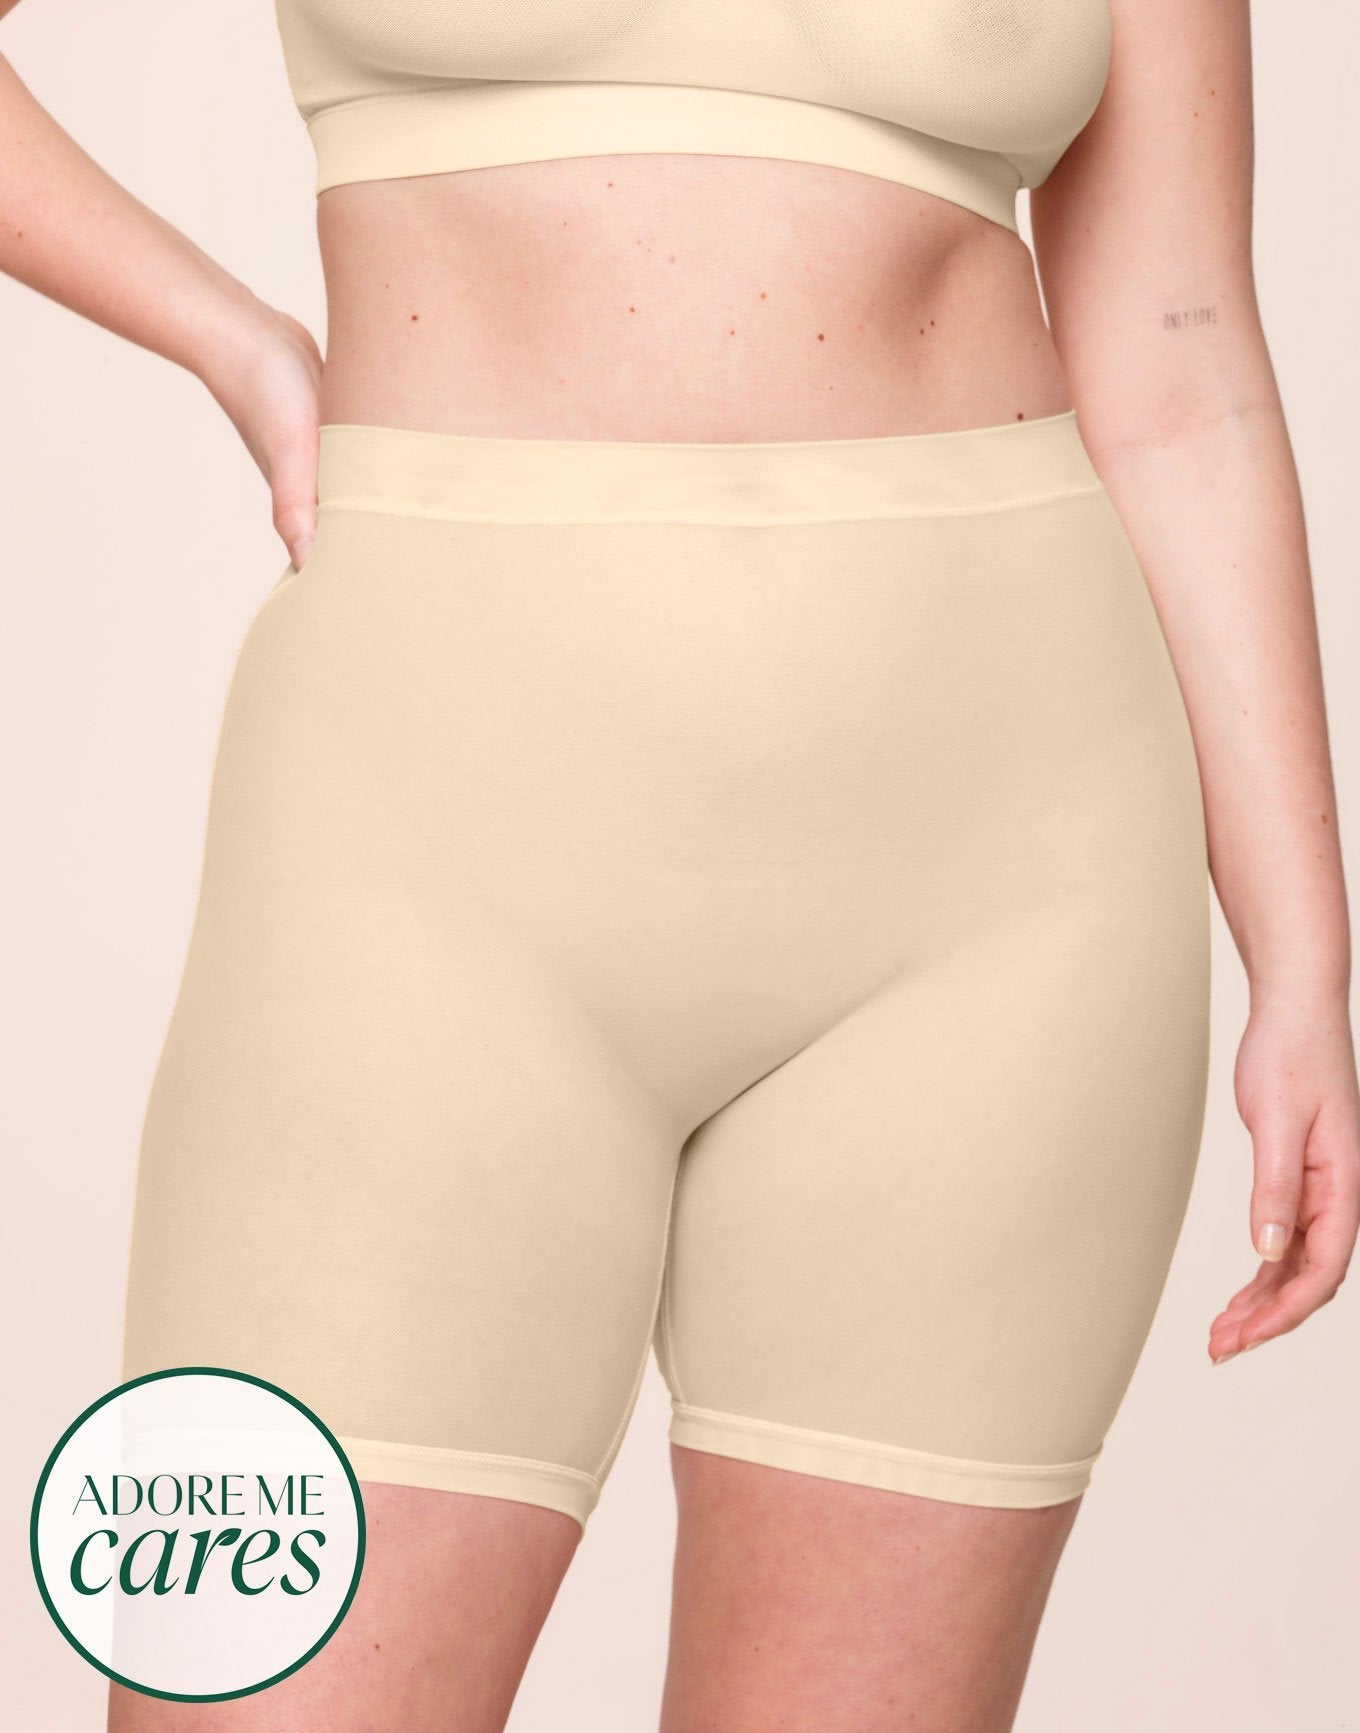 nueskin Dina Mesh High-Rise Shortie in color Dawn and shape shortie